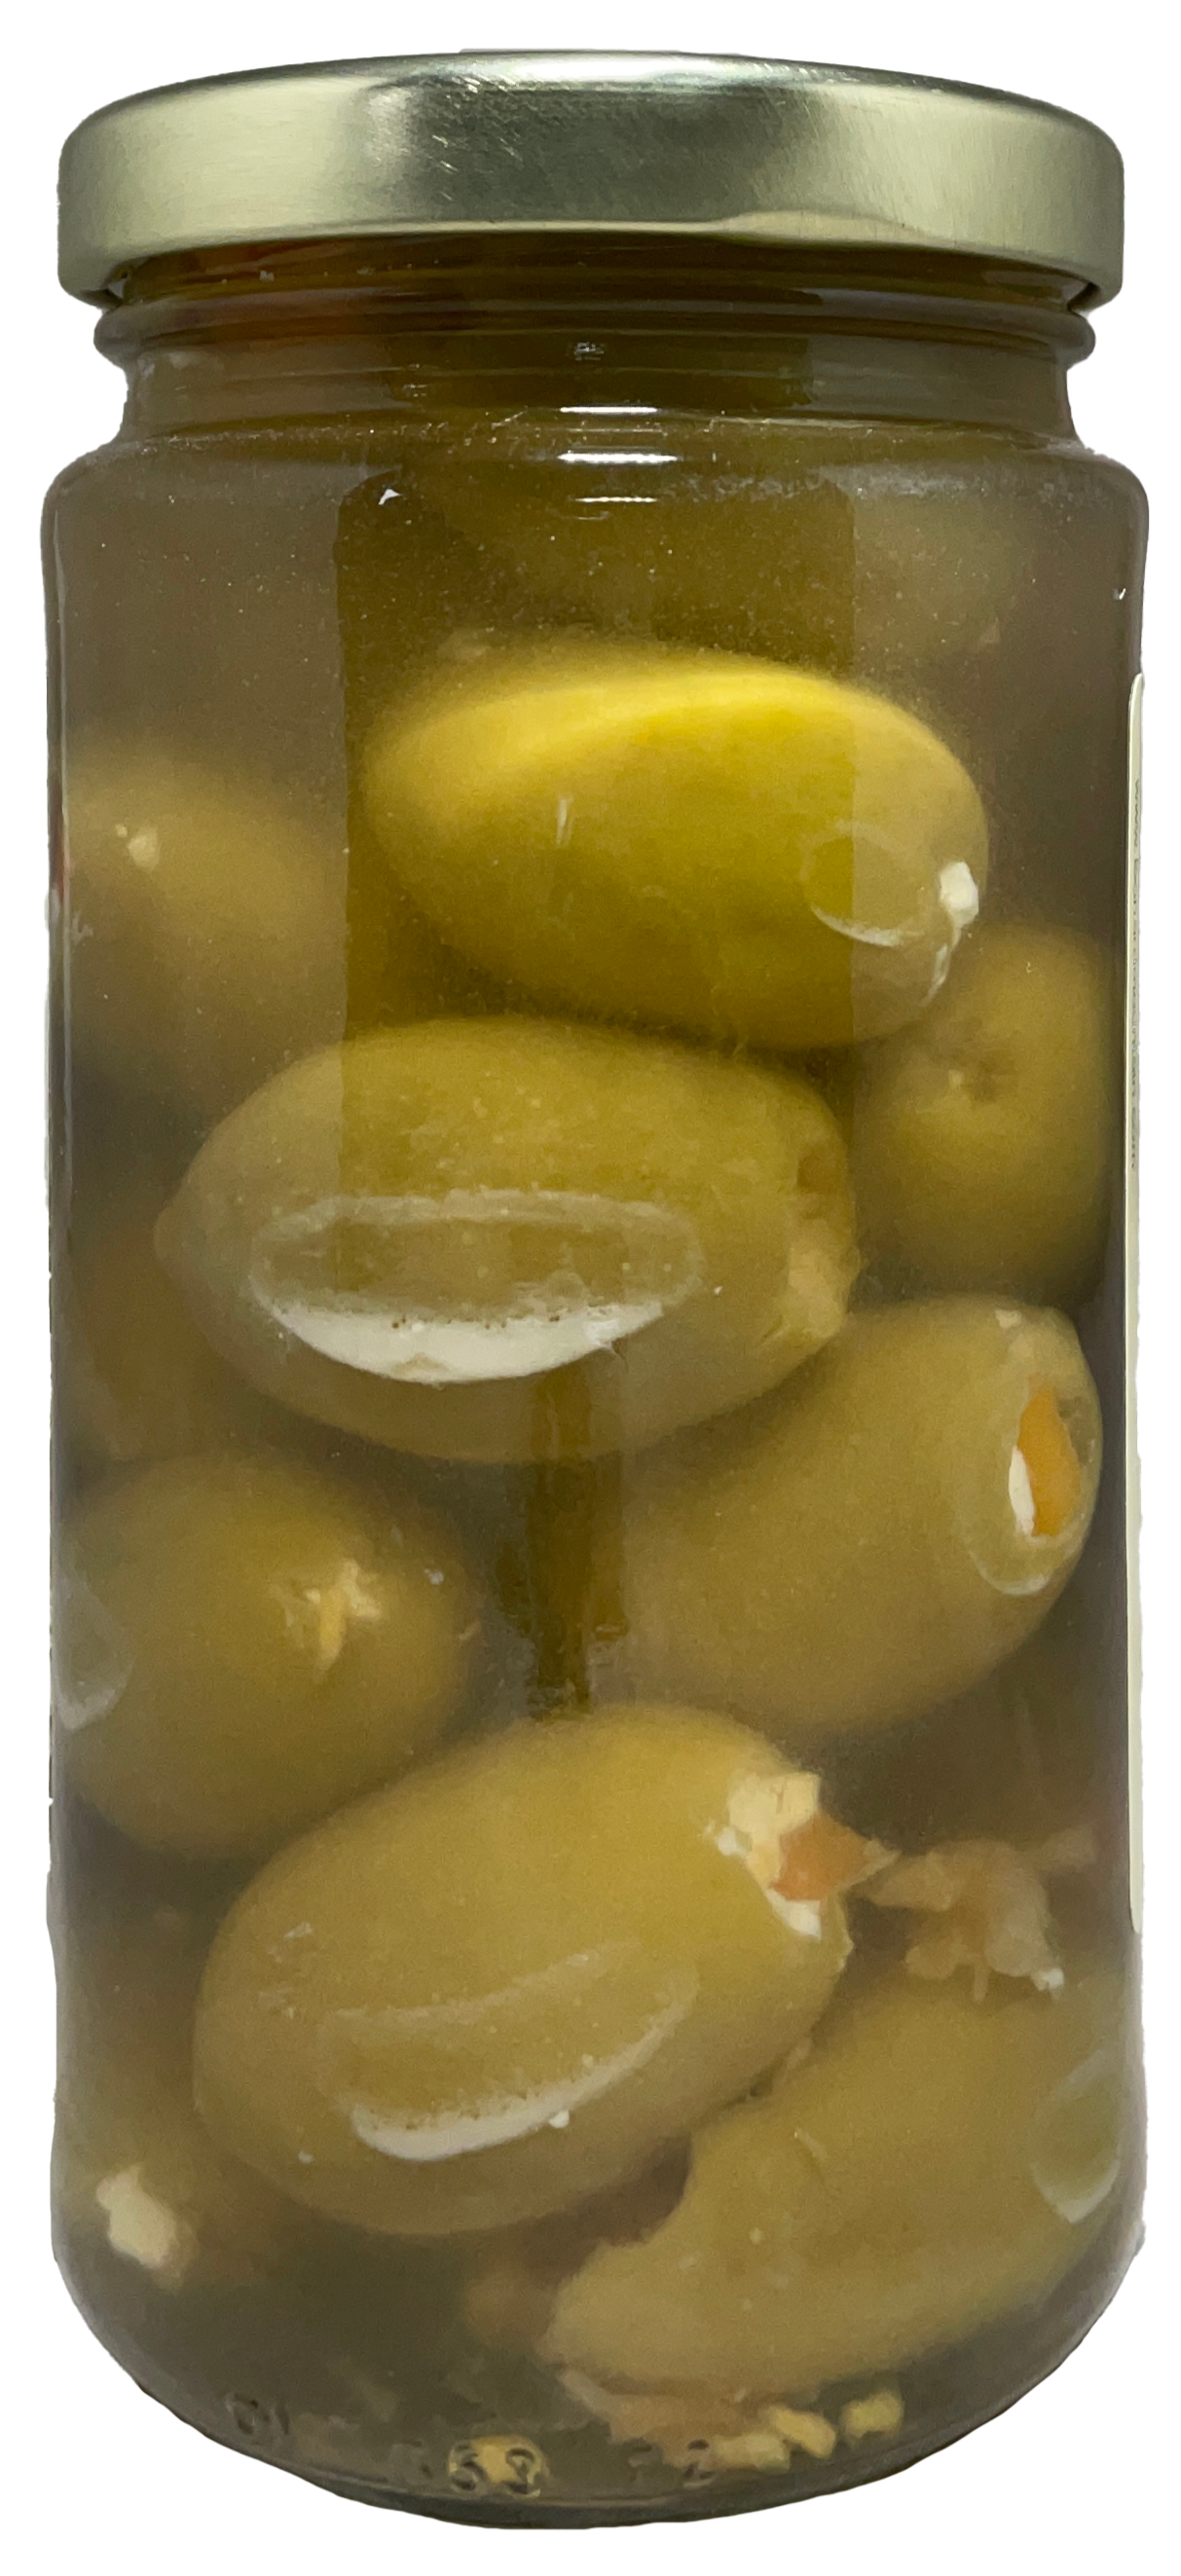 Cream Cheese & Habanero Double Stuffed Queen Olives *NEW LOWER PRICE*